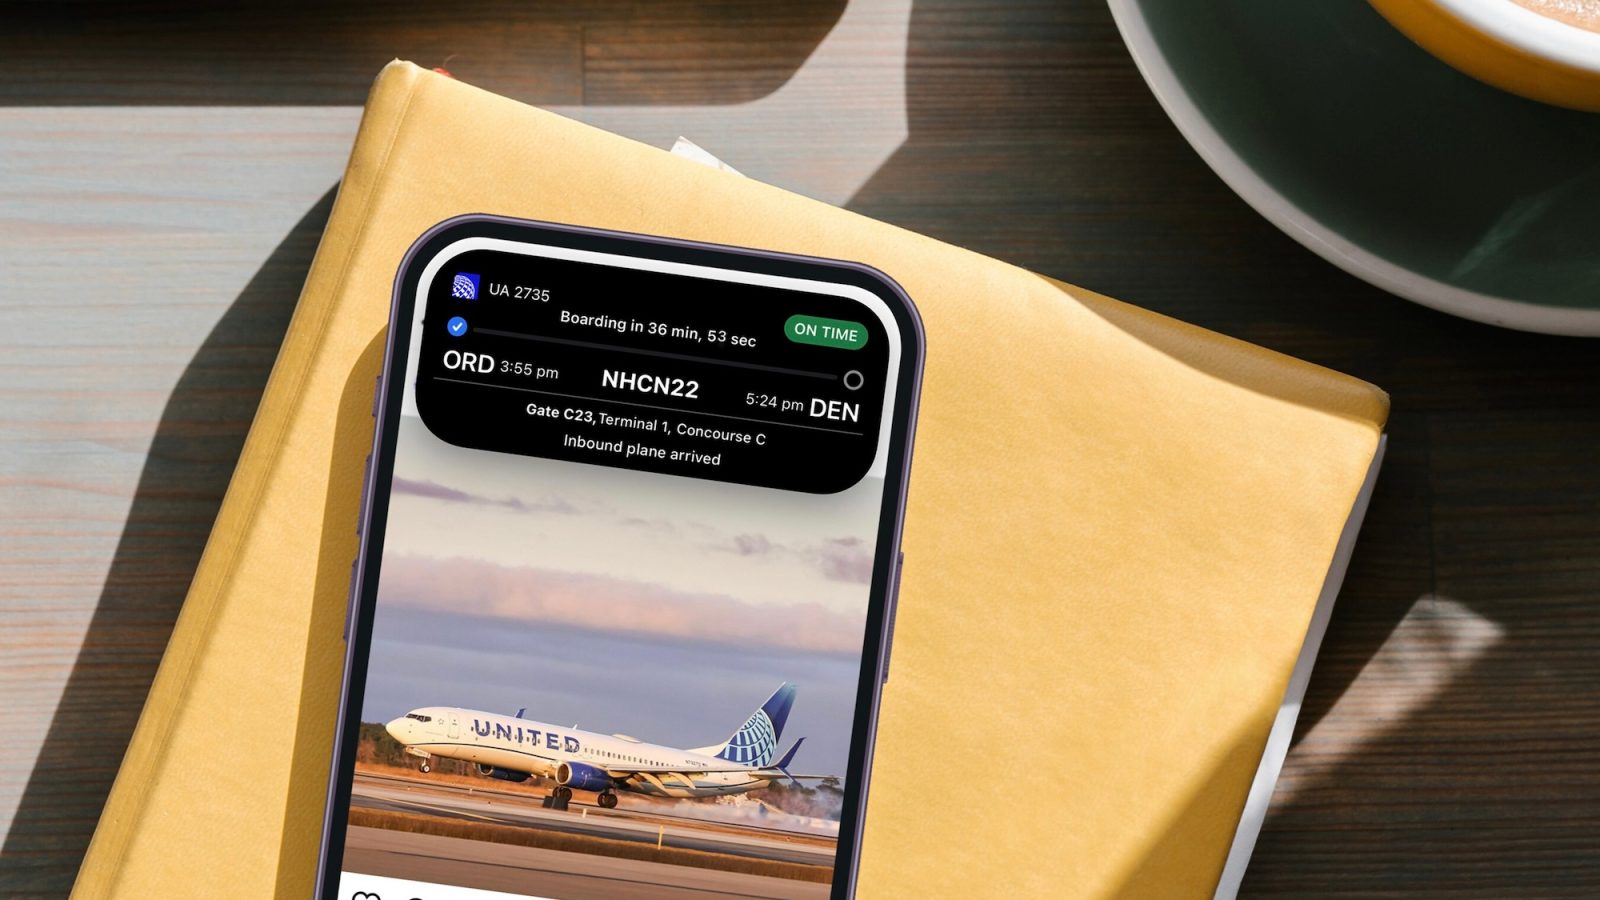 Dynamic Island on iPhone 14 Pro can now track your delayed United flight